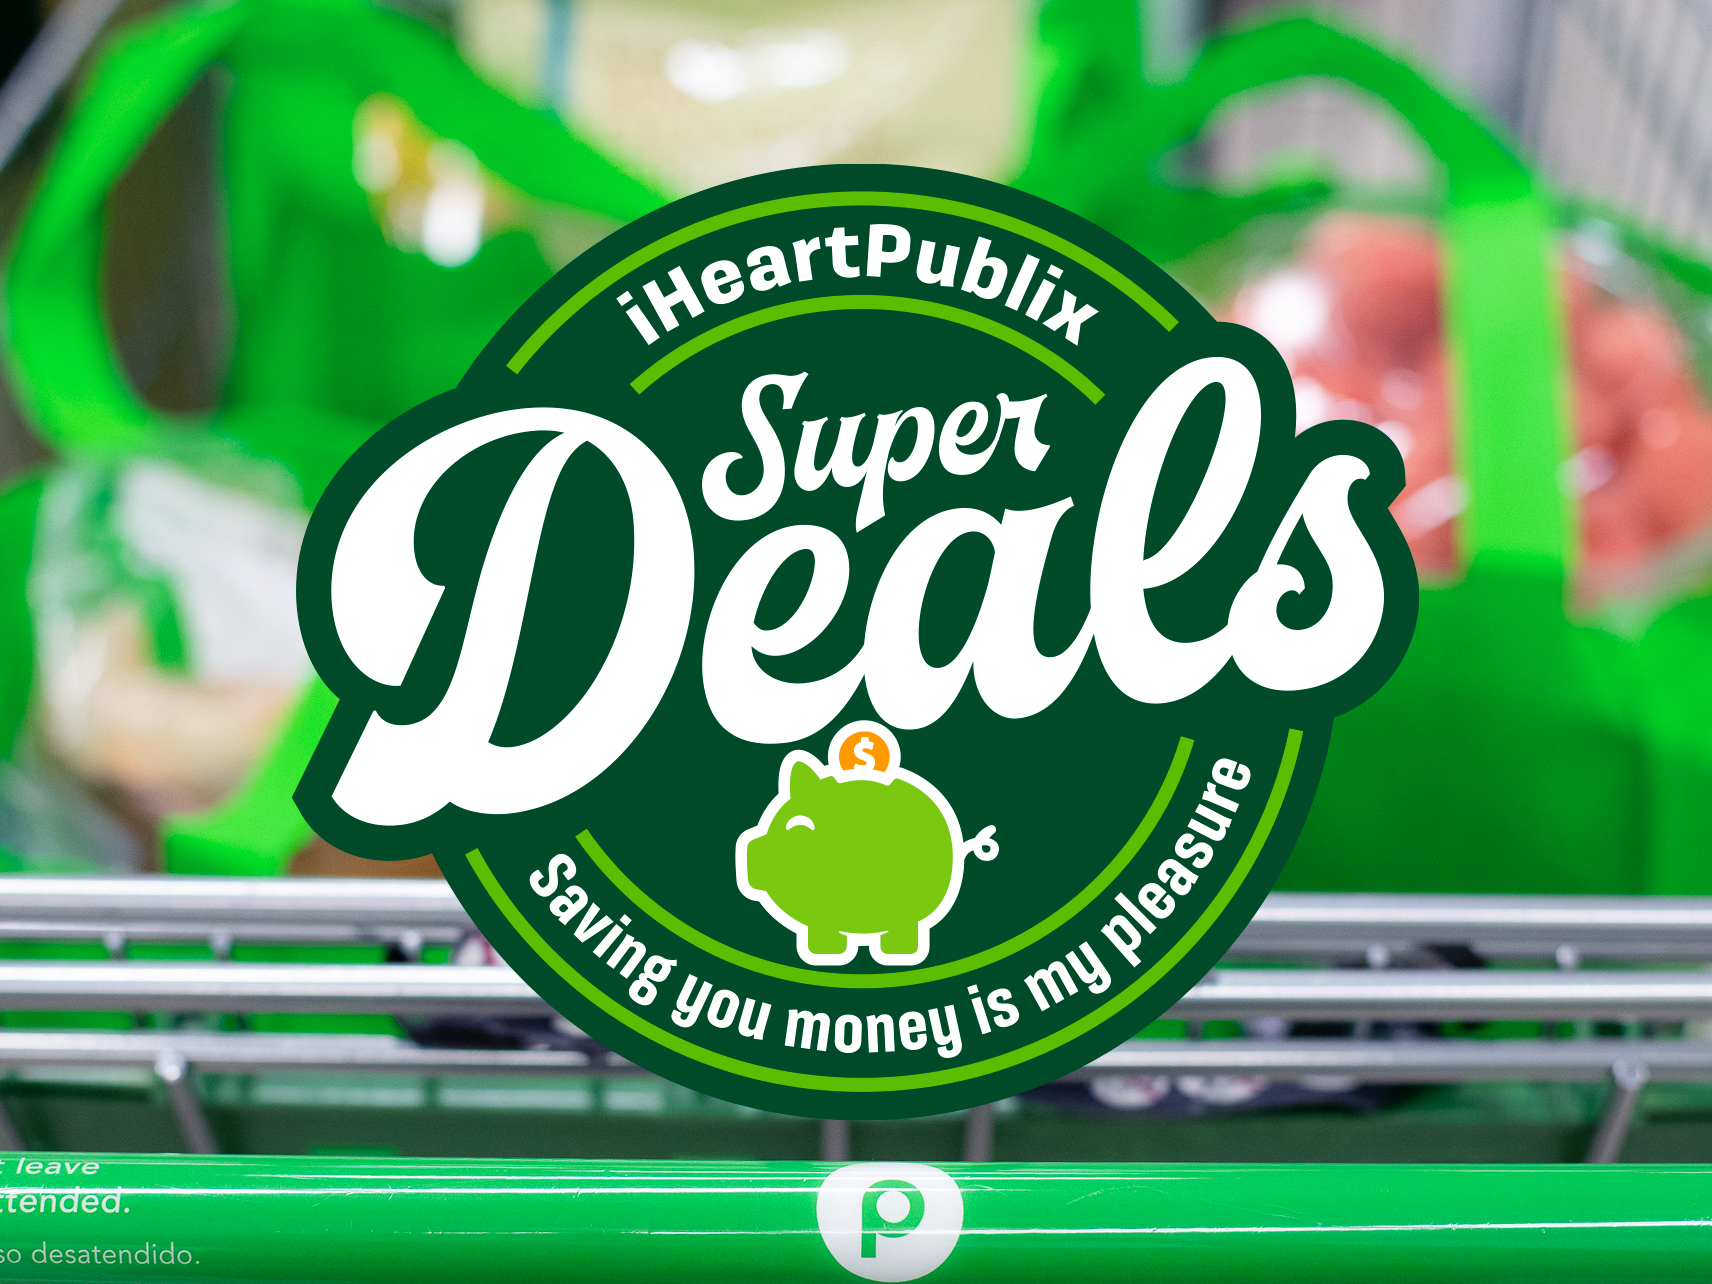 Publix Super Deals Week Of 6/8 to 6/14 (6/7 to 6/13 For Some)